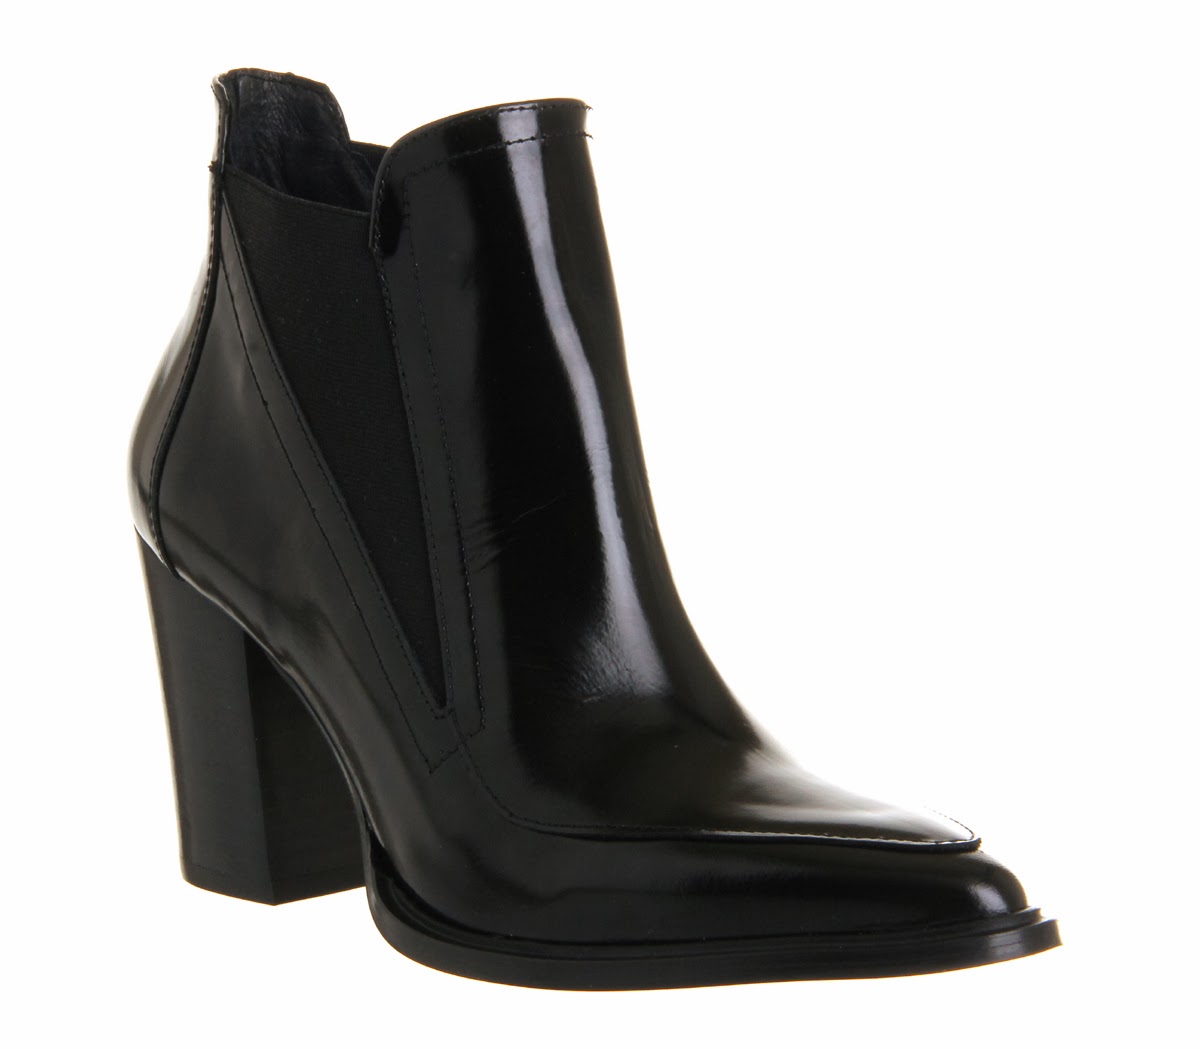 THE PERFECT BLACK BOOT